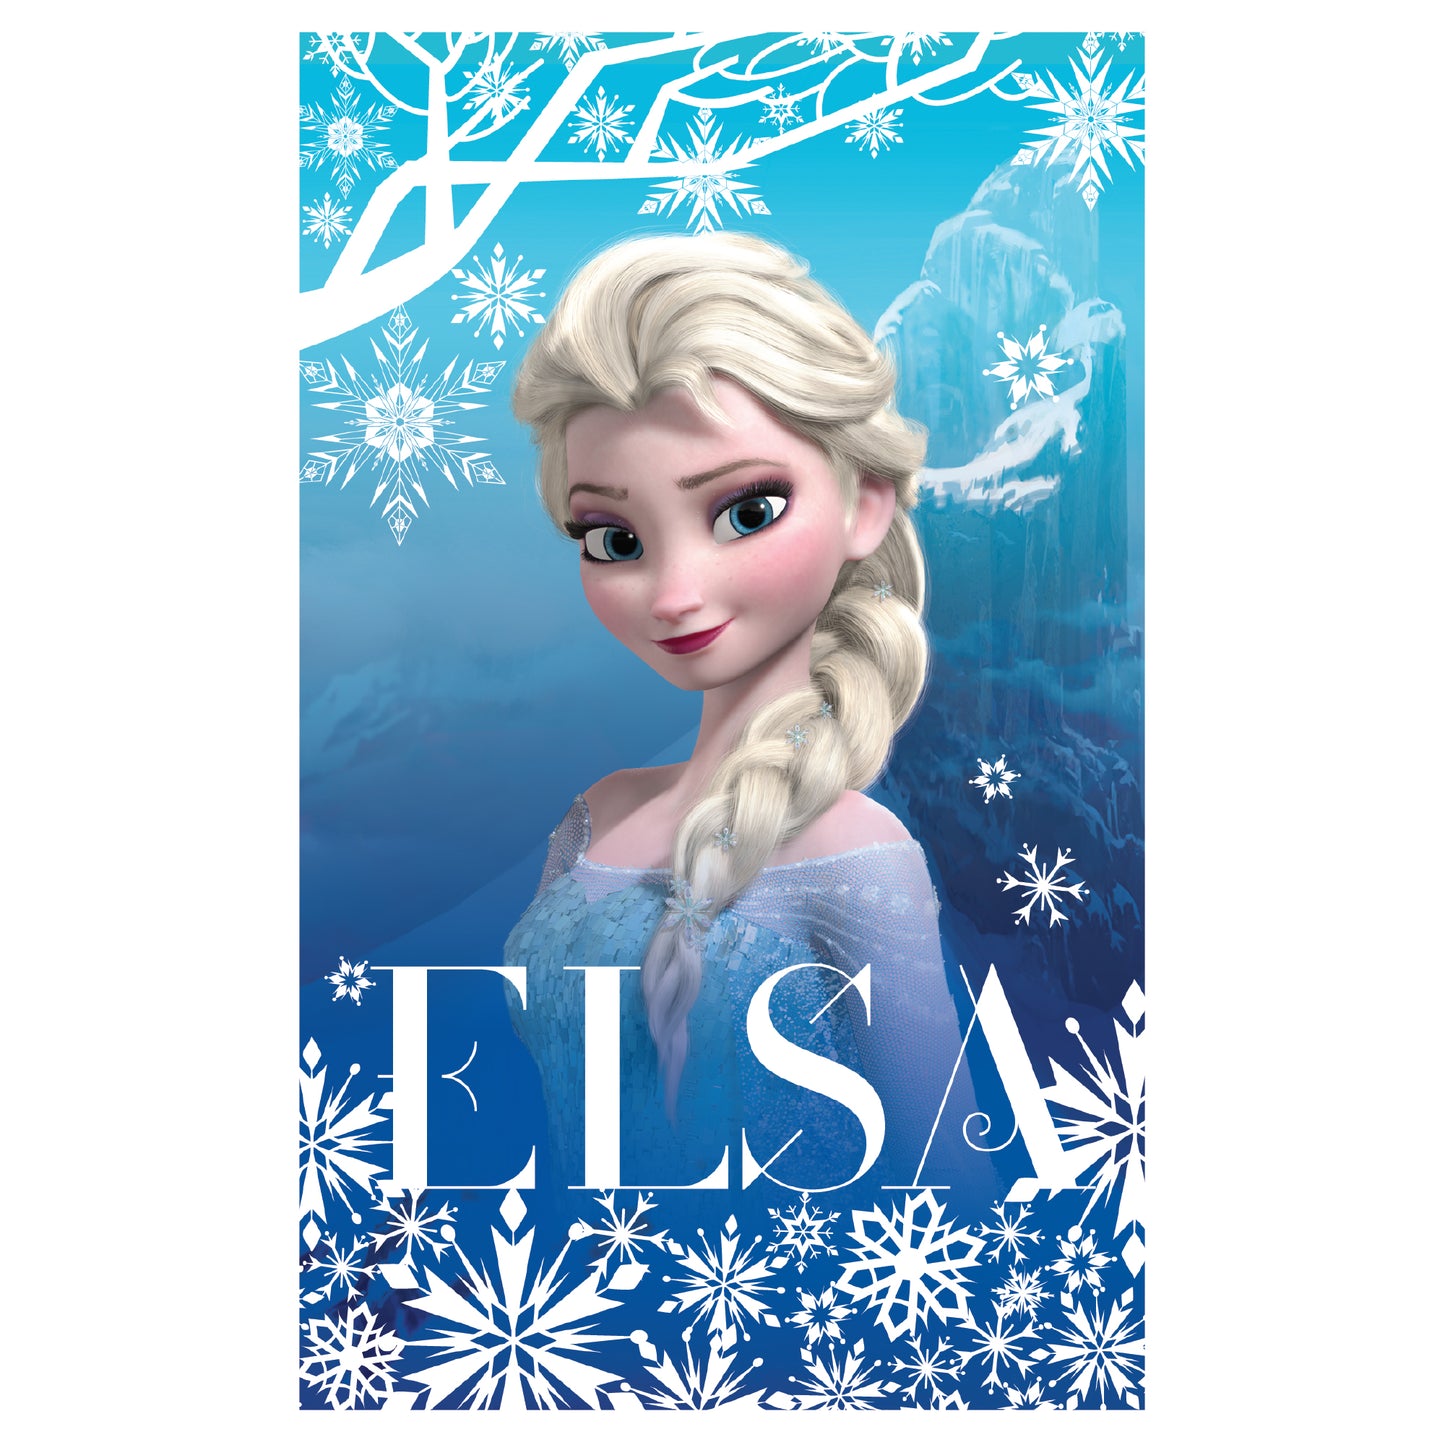 Frozen: Elsa Mural - Officially Licensed Disney Removable Adhesive